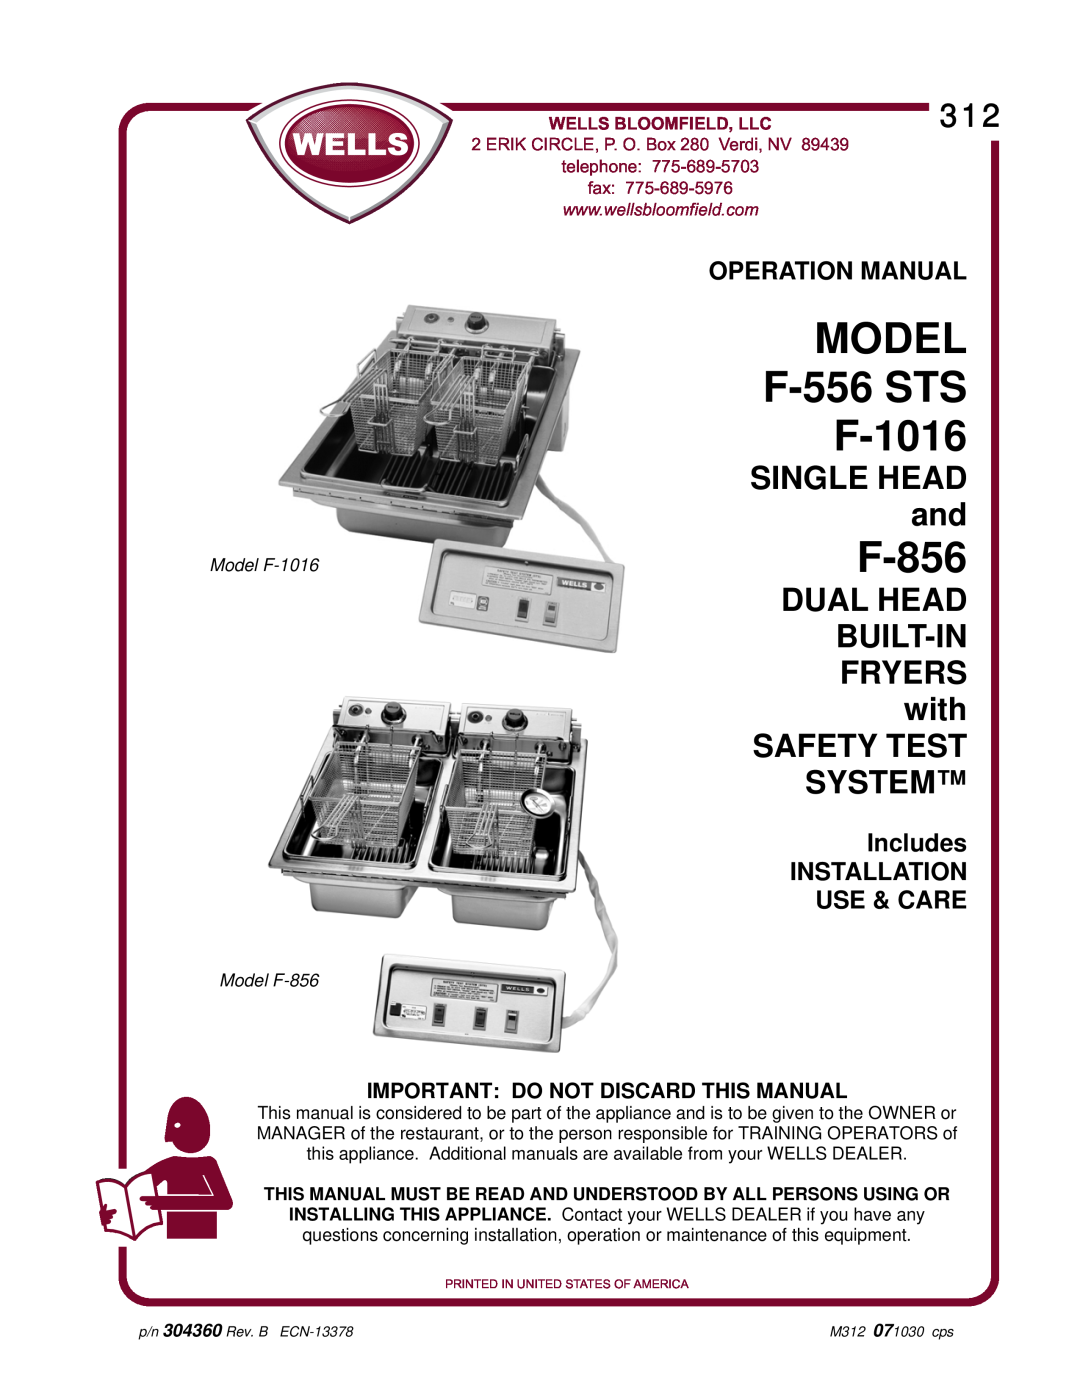 Wells operation manual SINGLE HEAD and, DUAL HEAD BUILT-INFRYERS with SAFETY TEST SYSTEM, MODEL F-556STS F-1016, F-856 